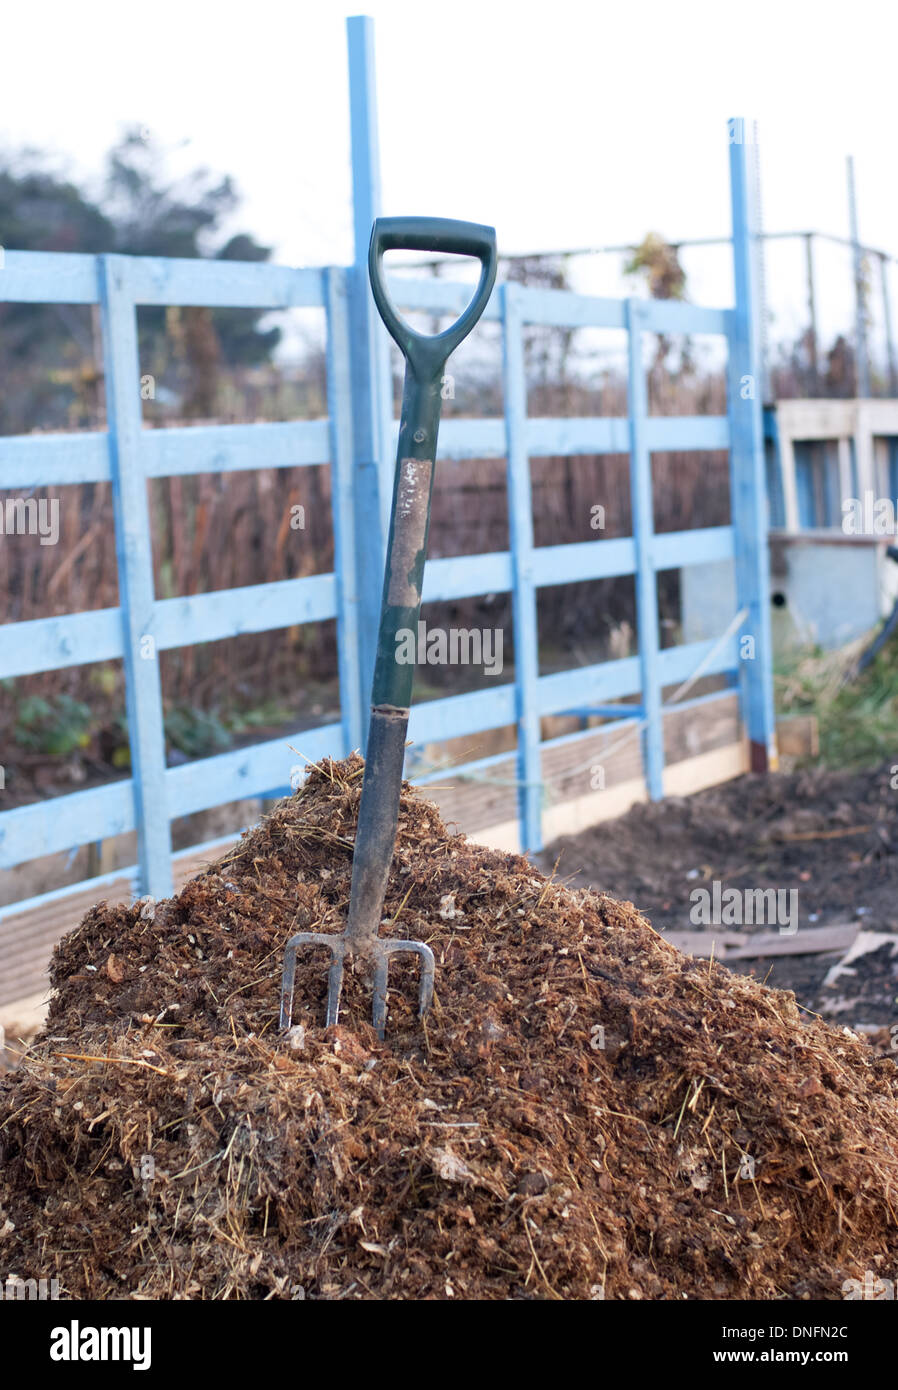 Preparing soil on a allotment during winter with manure organic matter Stock Photo